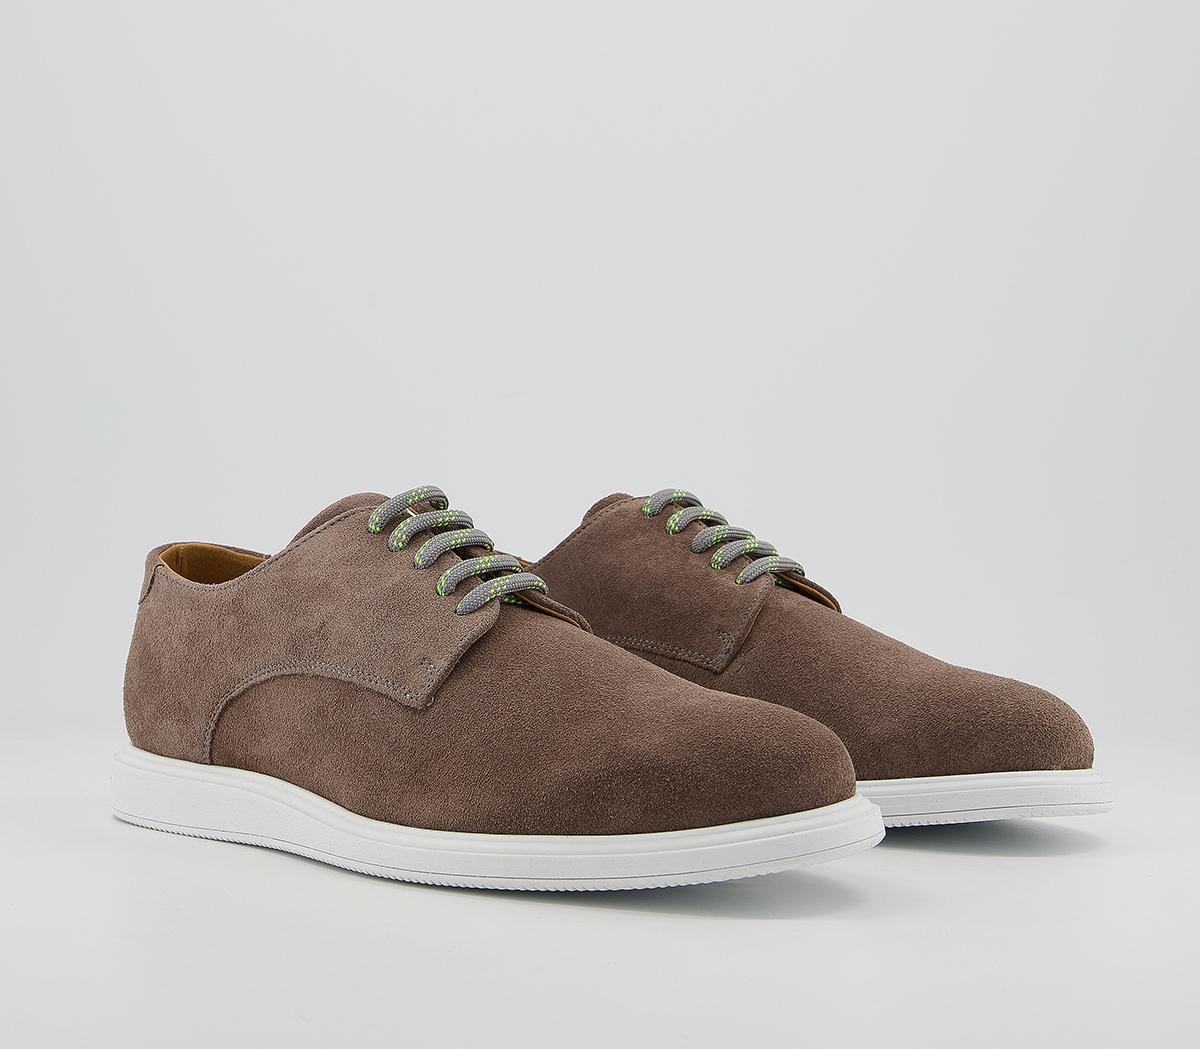 Office Caleb Derby White Sole Shoes Grey Suede - Casual